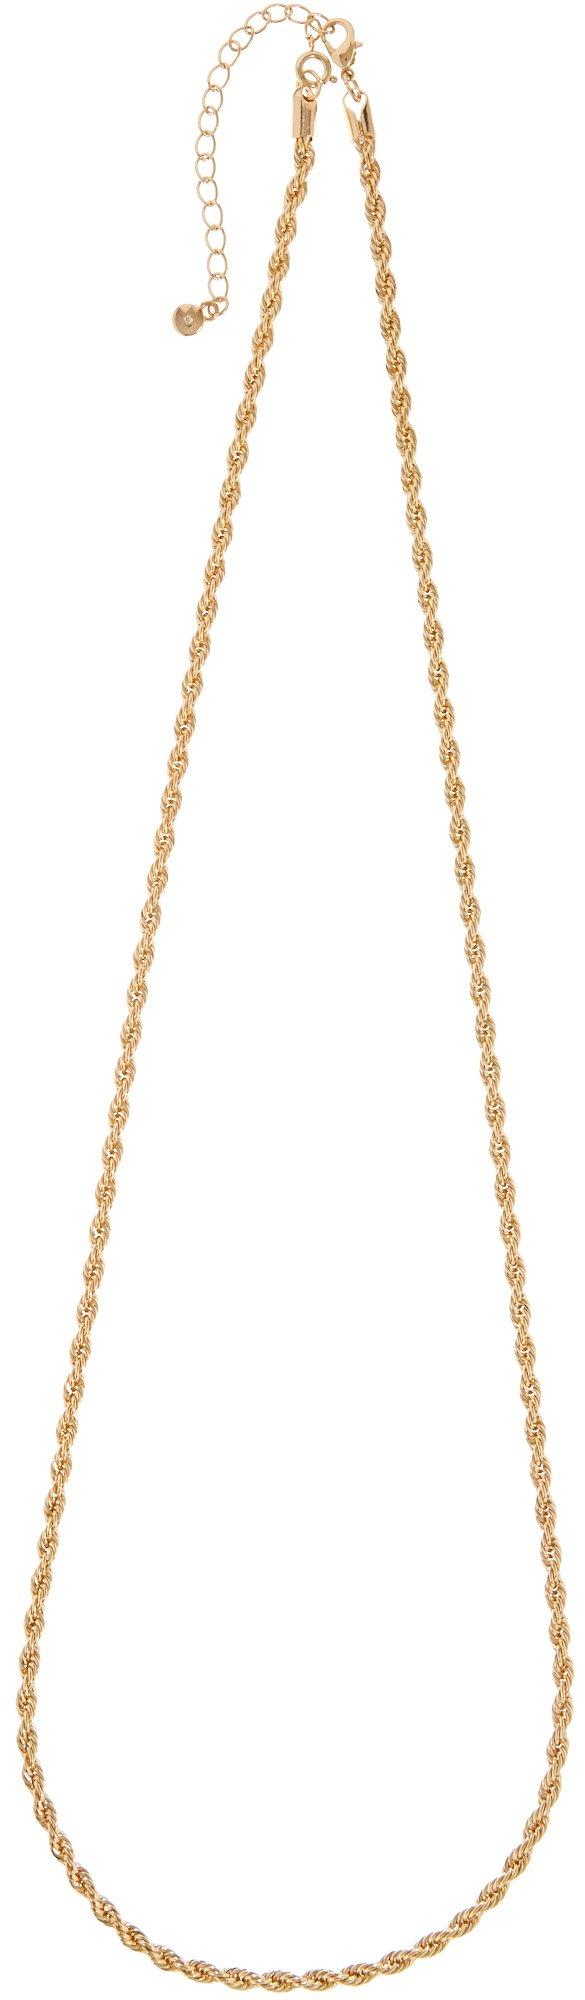 By Roman 30'' Gold Tone Rope Chain Necklace